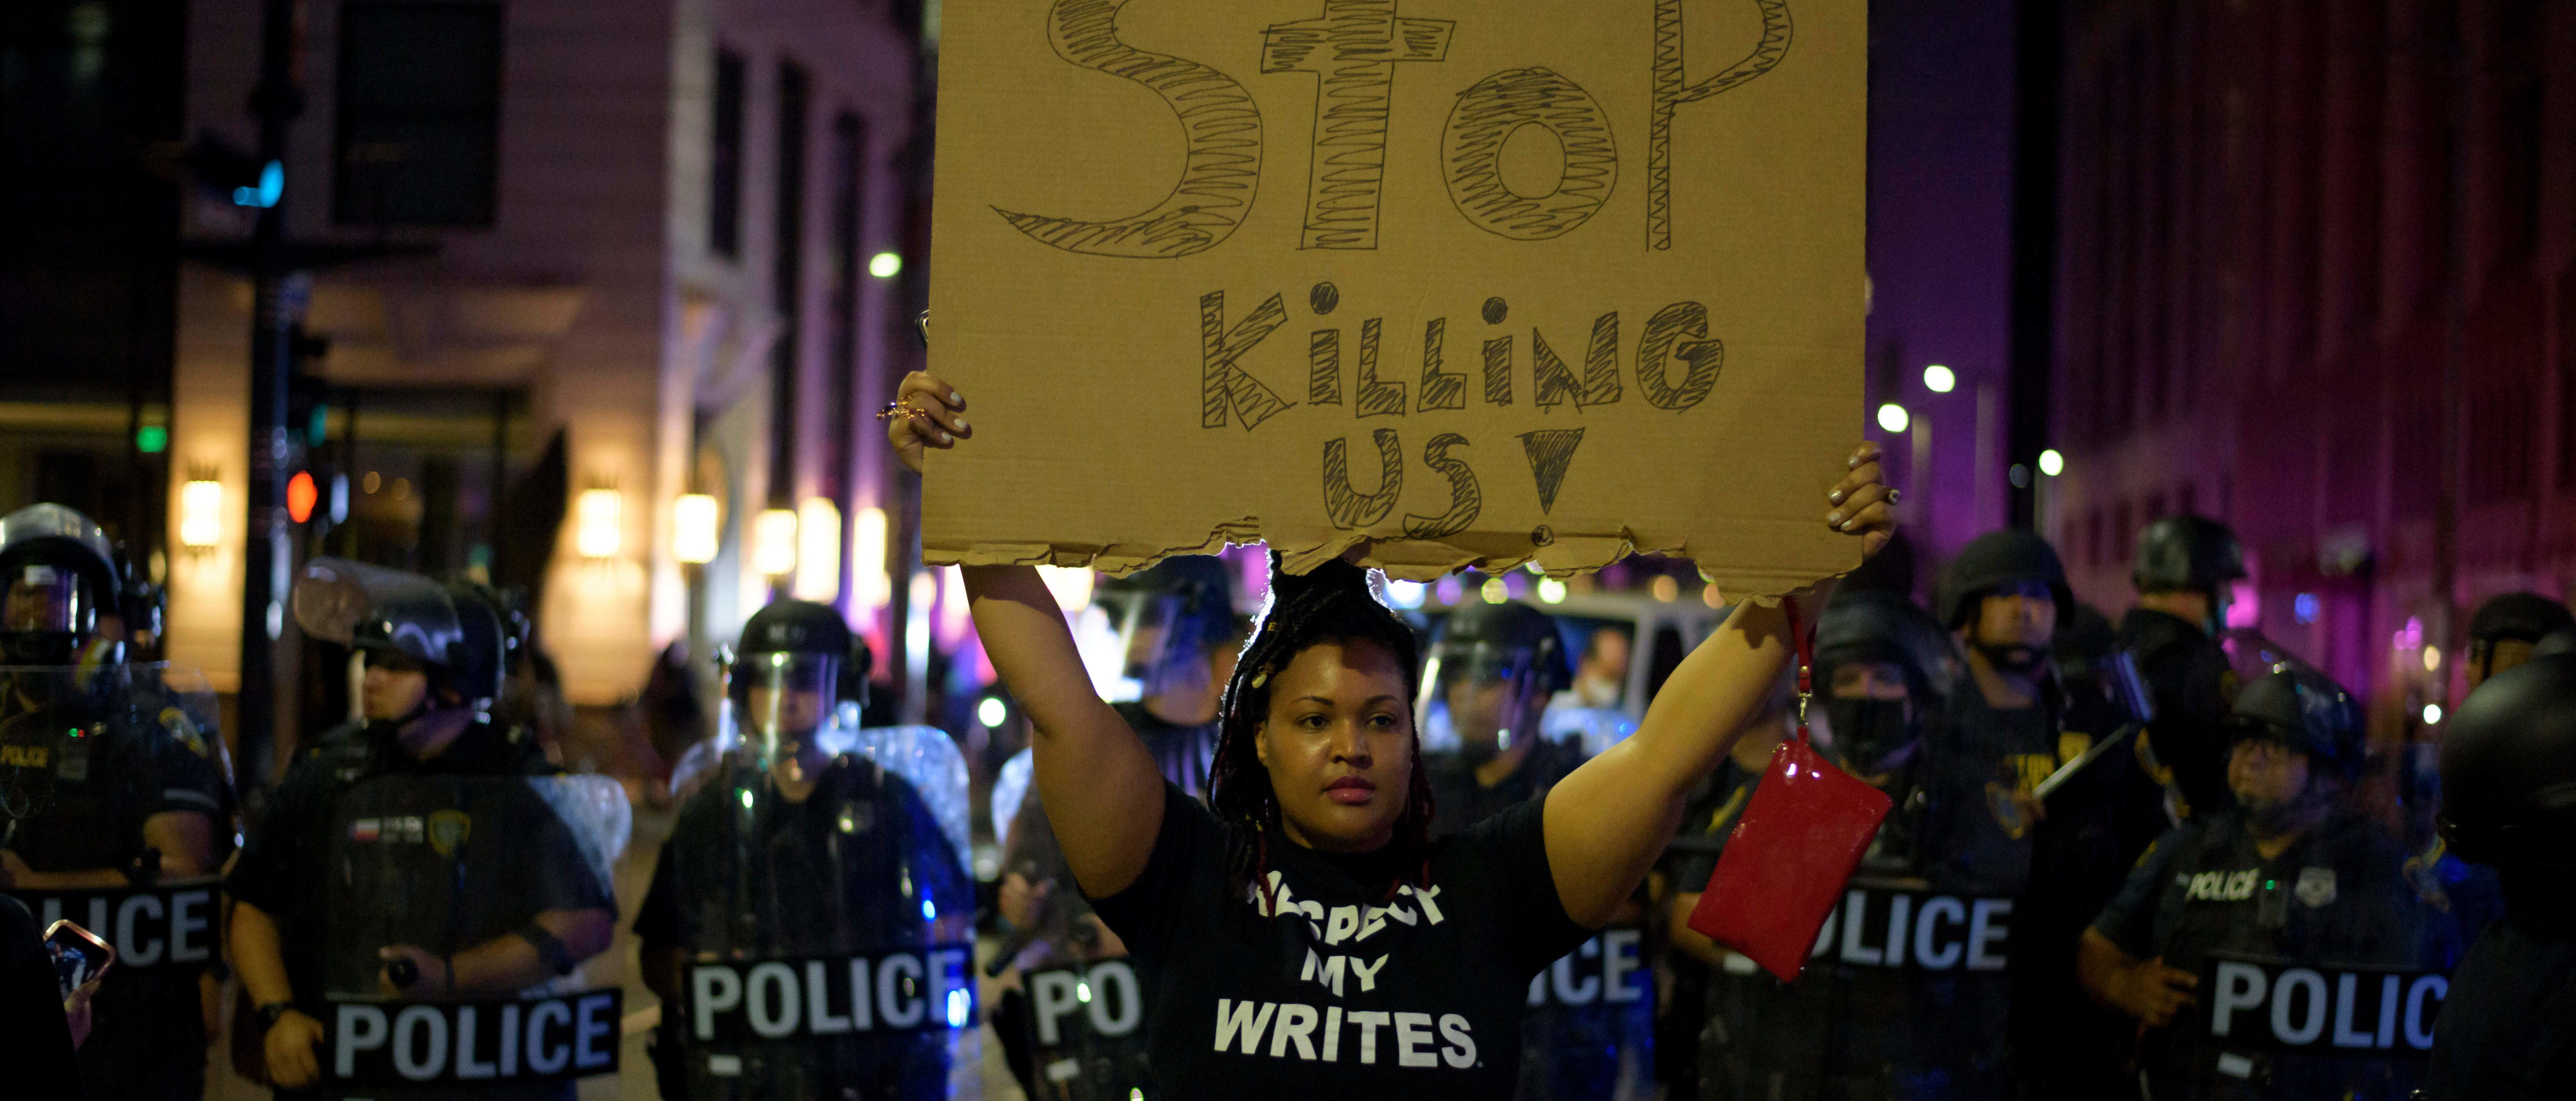 A protester holds up a sign with a row of police officers behind during a "Justice 4 George Floyd" demonstration over the death of George Floyd, a black man who died after a white policeman kneeled on his neck for several minutes in Houston, Texas on May 29, 2020. - Demonstrations are being held across the US after George Floyd died in police custody on May 25. (Photo by MARK FELIX/AFP /AFP via Getty Images)